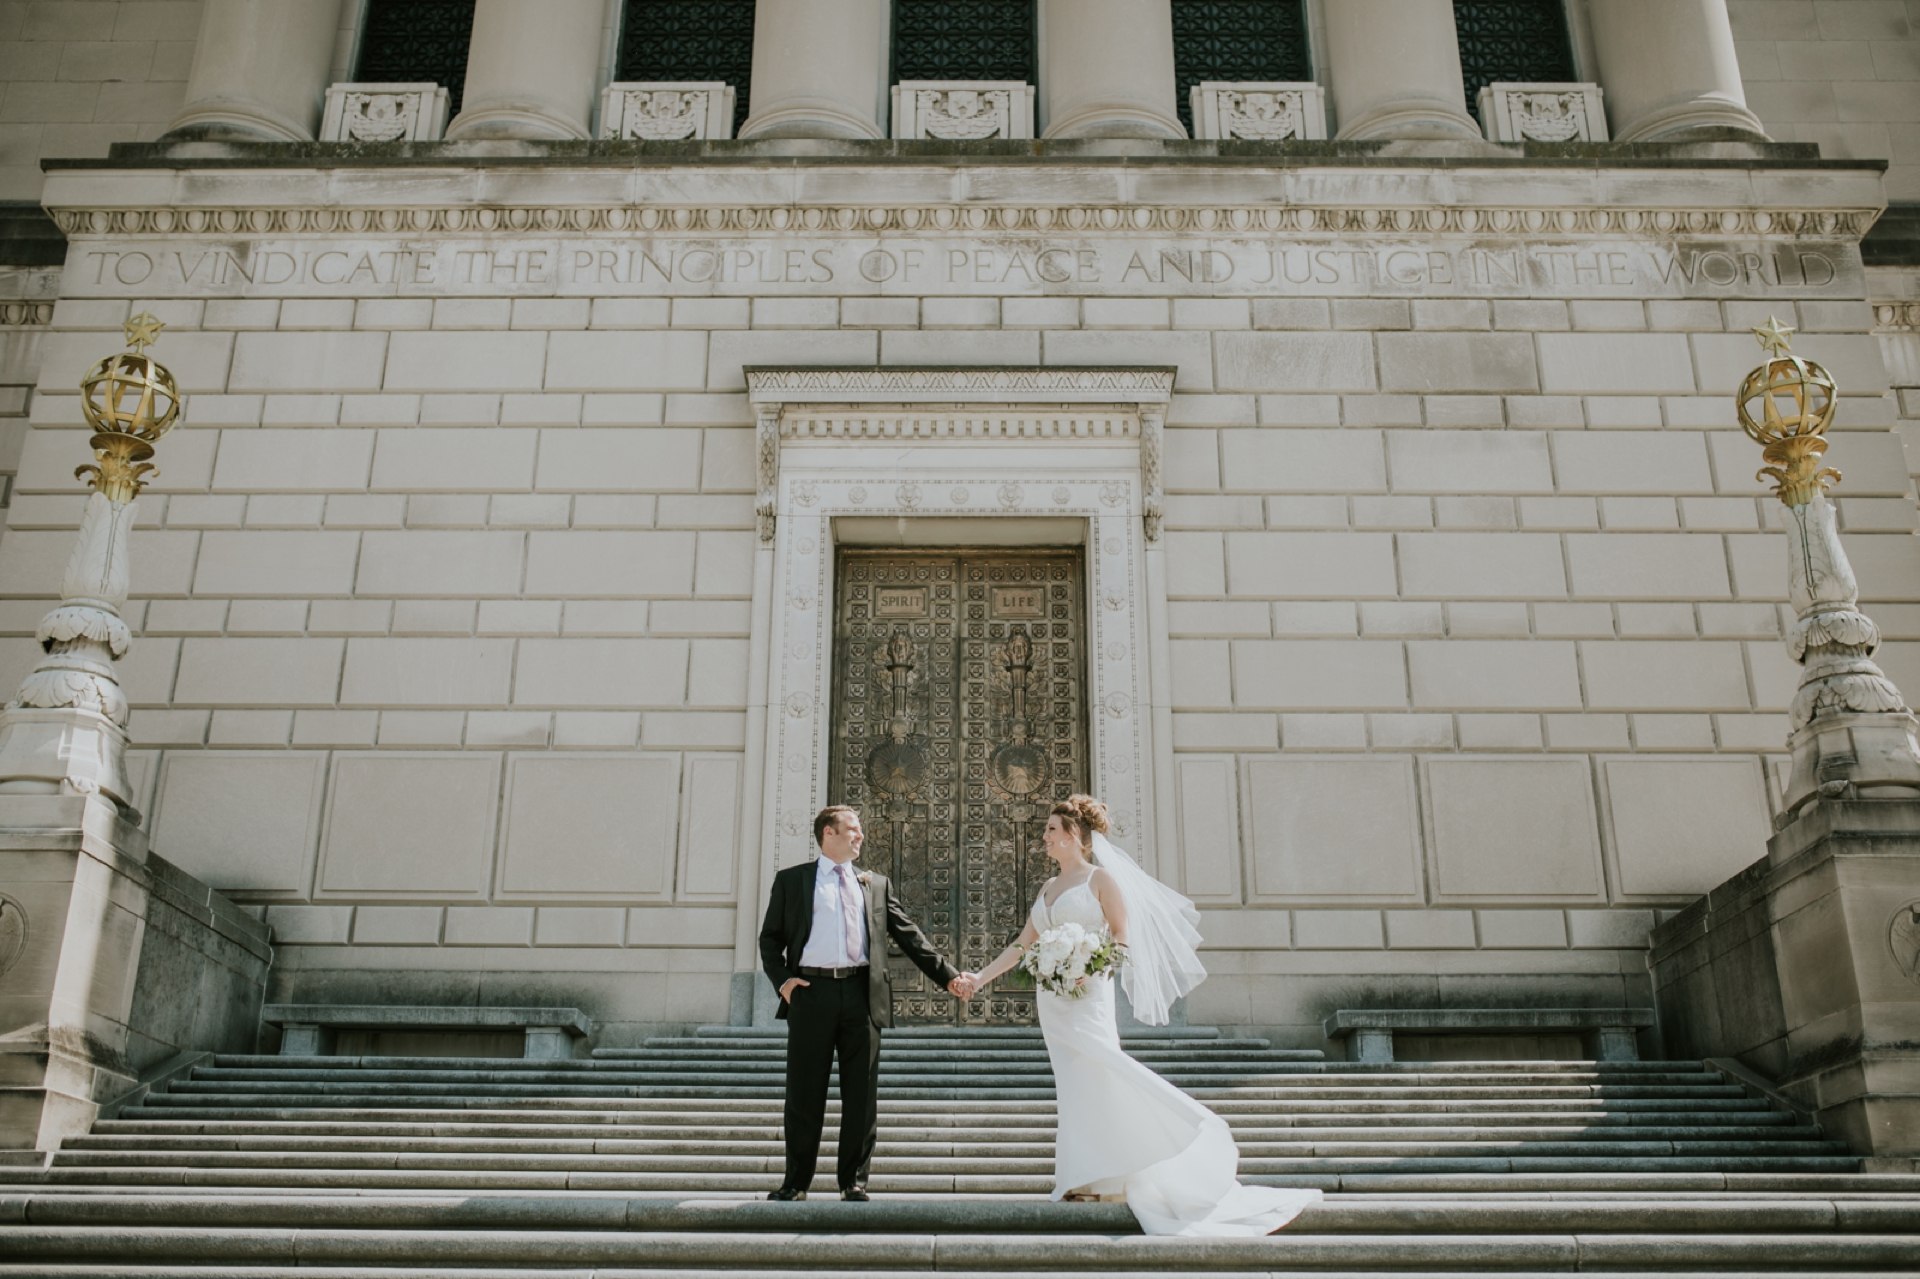 Man in tuxedo and woman in white dress stand on the Indiana War Memorial steps holding hands and looking at each other